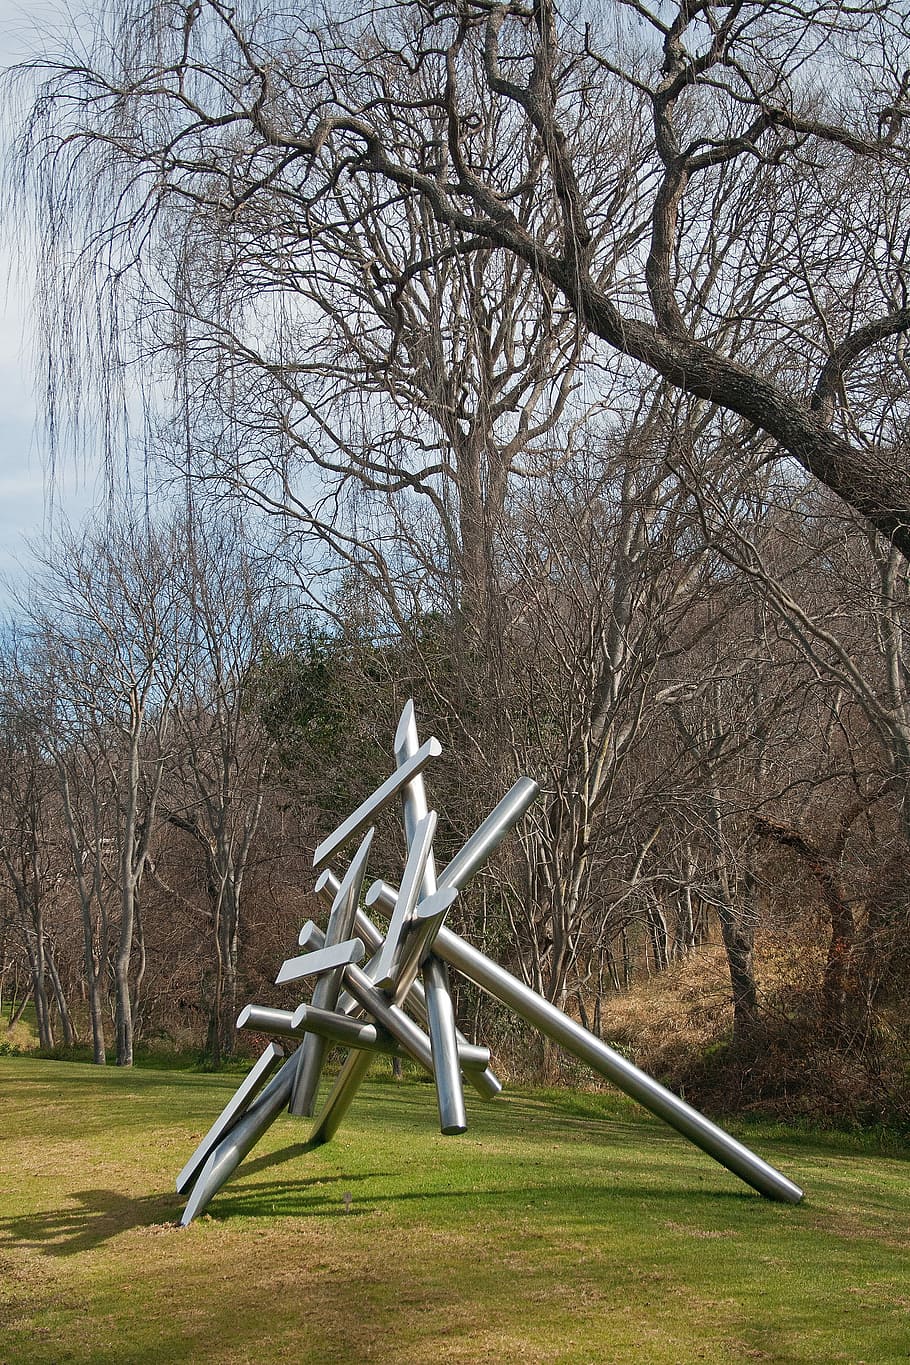 Sculpture, Metal, Poles, Pipes, Shiny, structure, intersecting, park, tree, bare tree